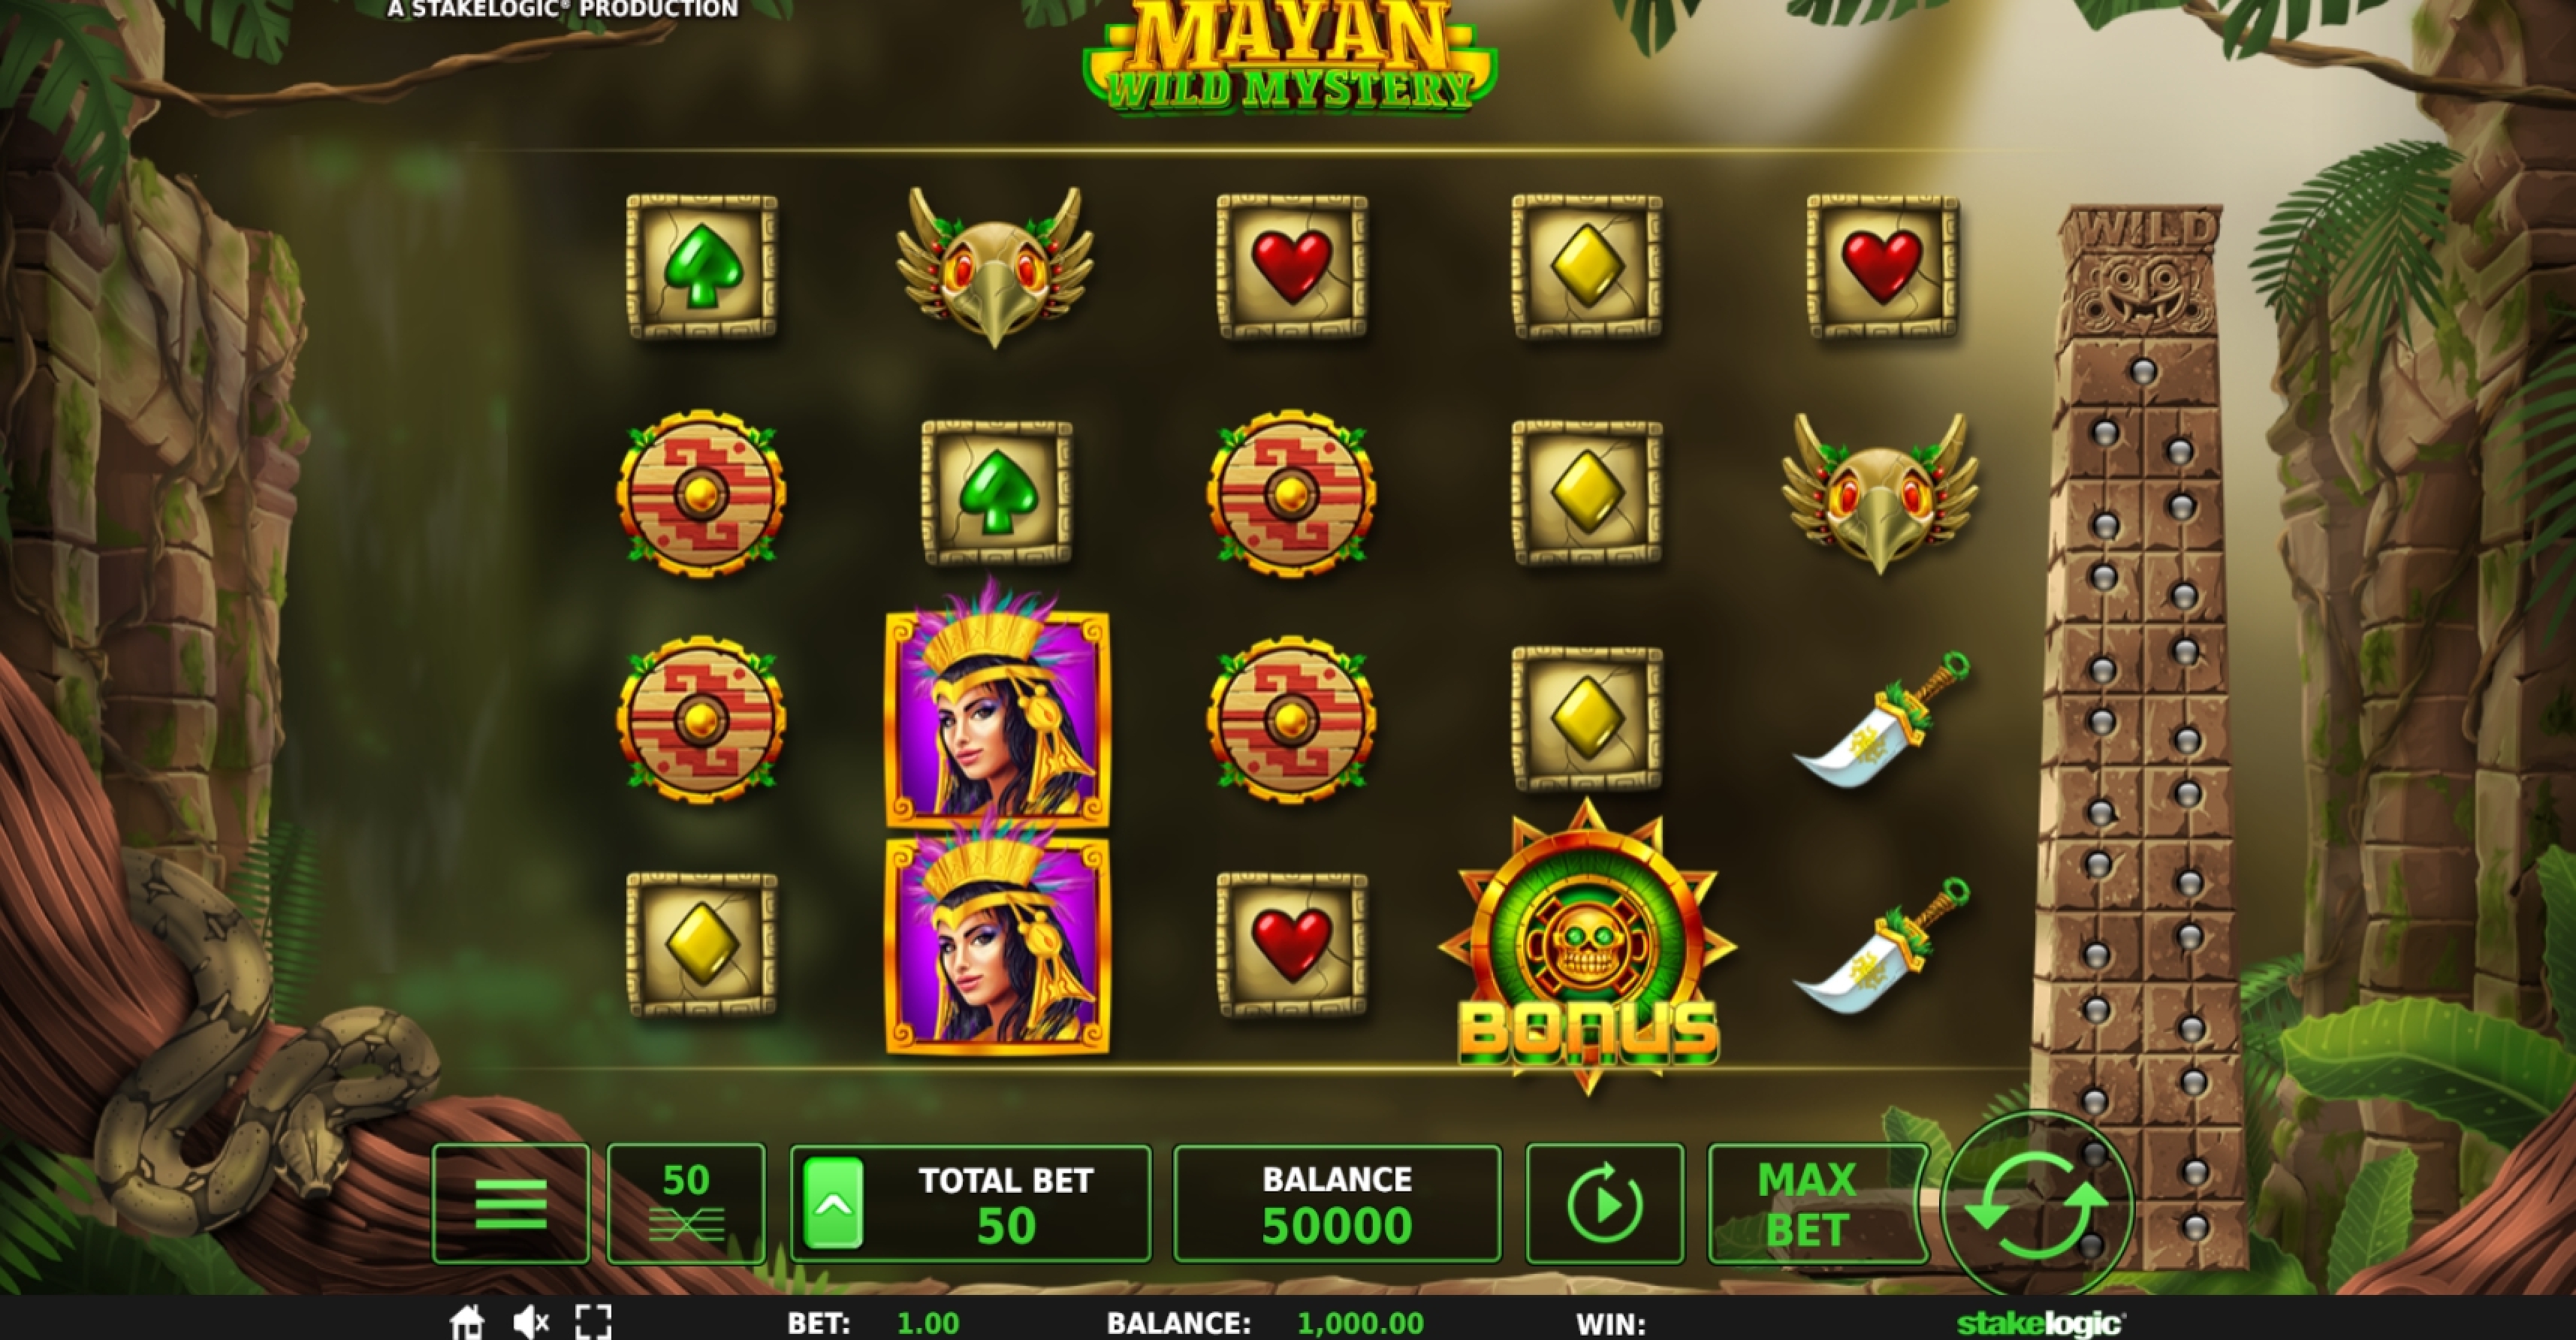 Reels in Mayan Wild Mystery Slot Game by Stakelogic